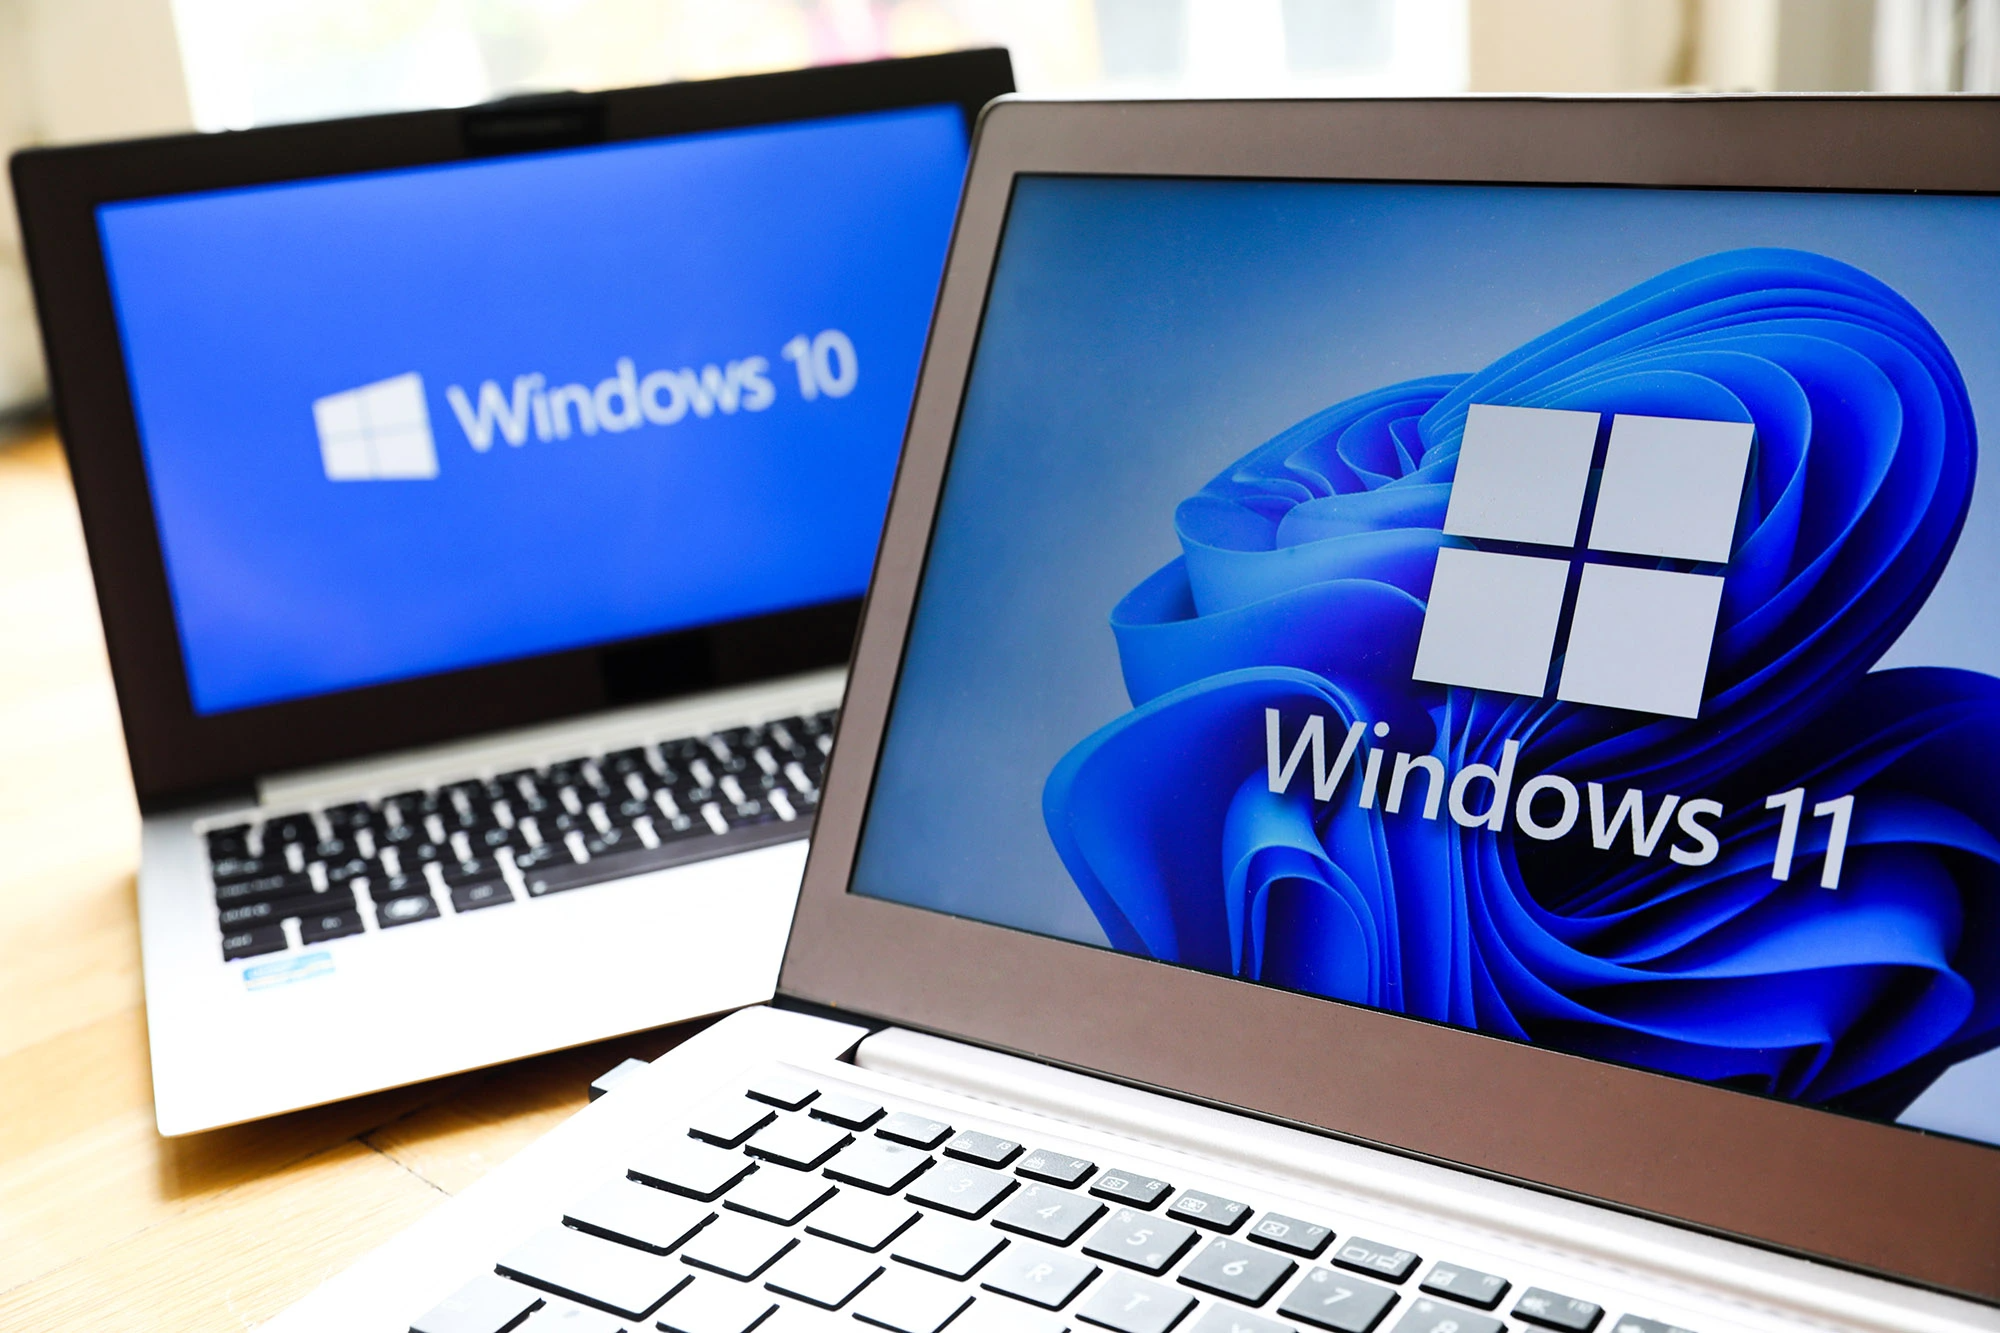 Windows 11 still can’t beat Windows 10 in many scenarios: new benchmarks with PCWorld’s Intel Core i9-13900K